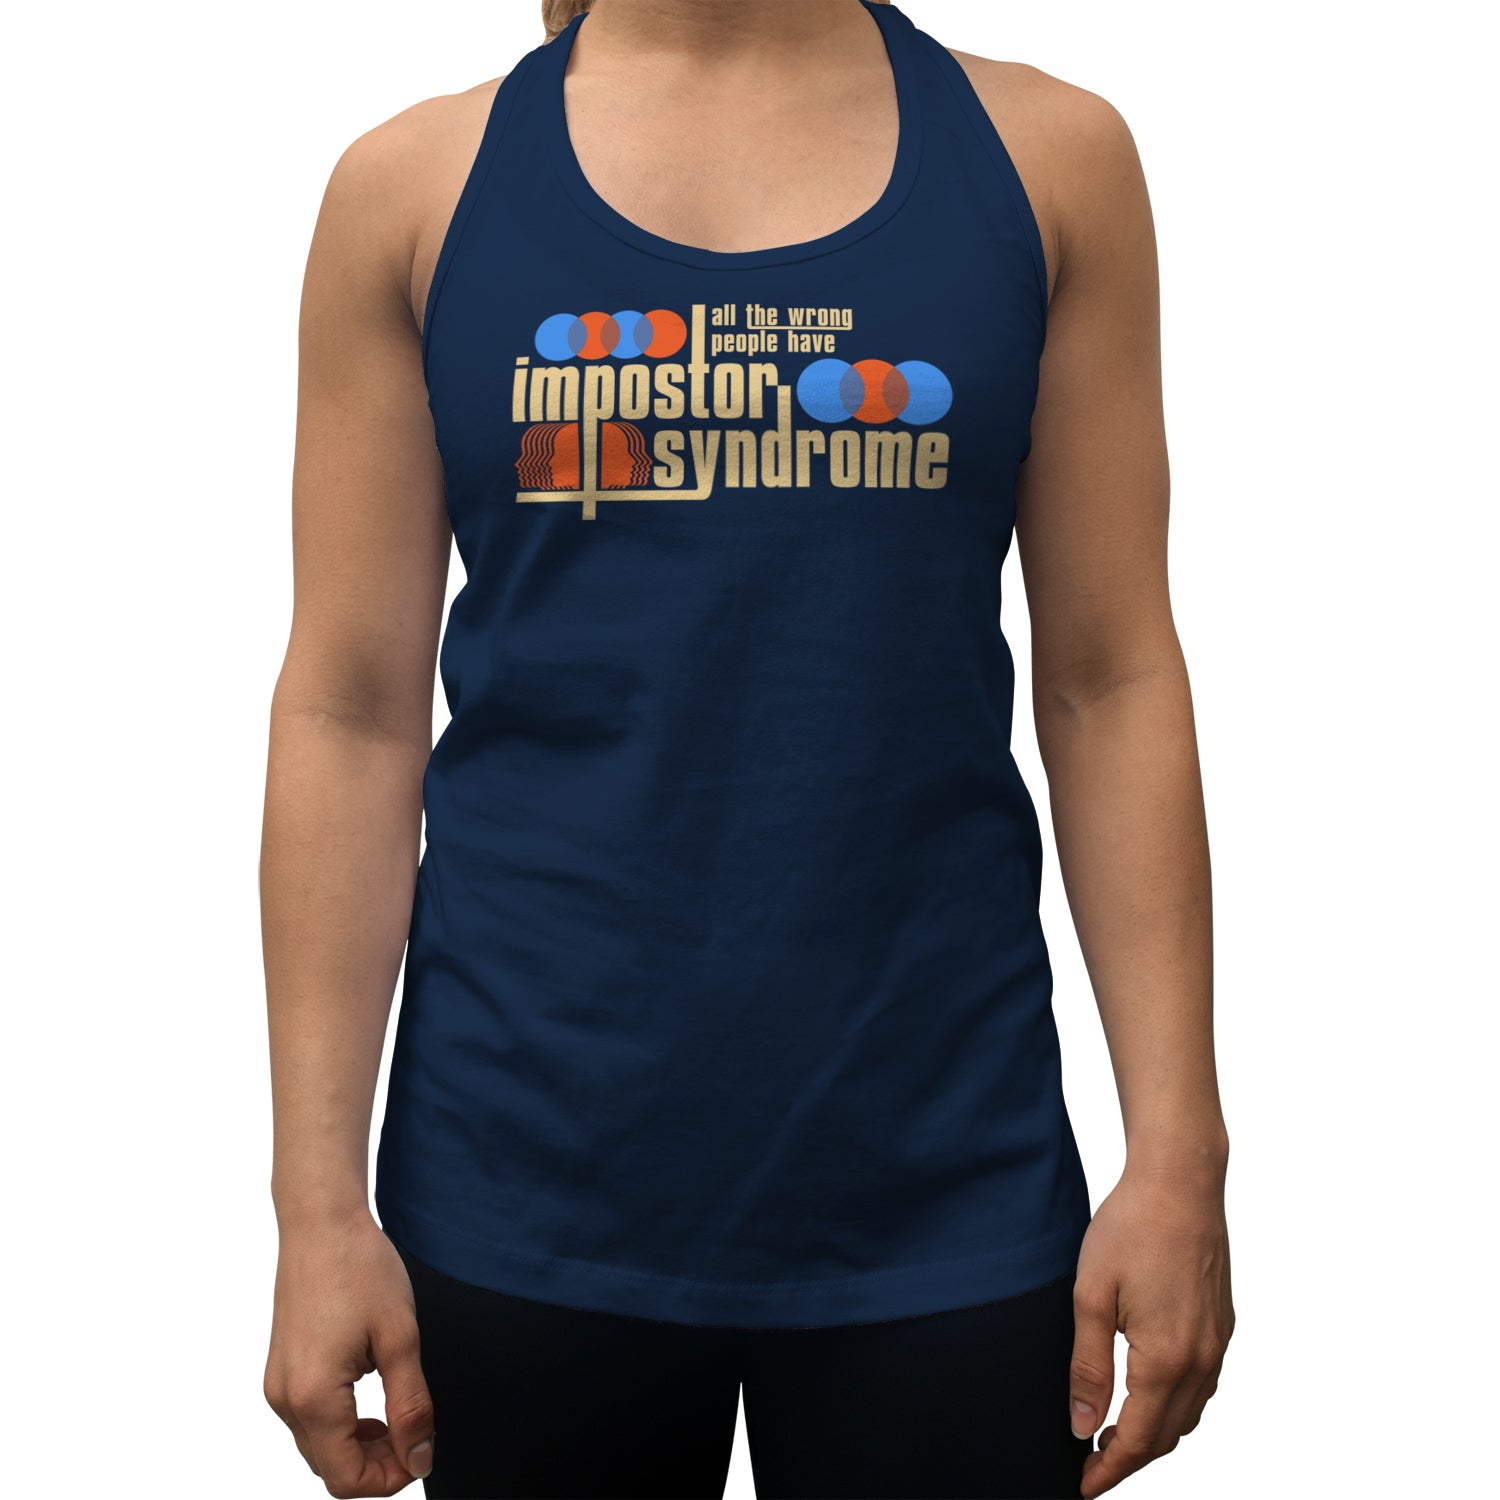 Women's All The Wrong People Have Impostor Syndrome Racerback Tank Top